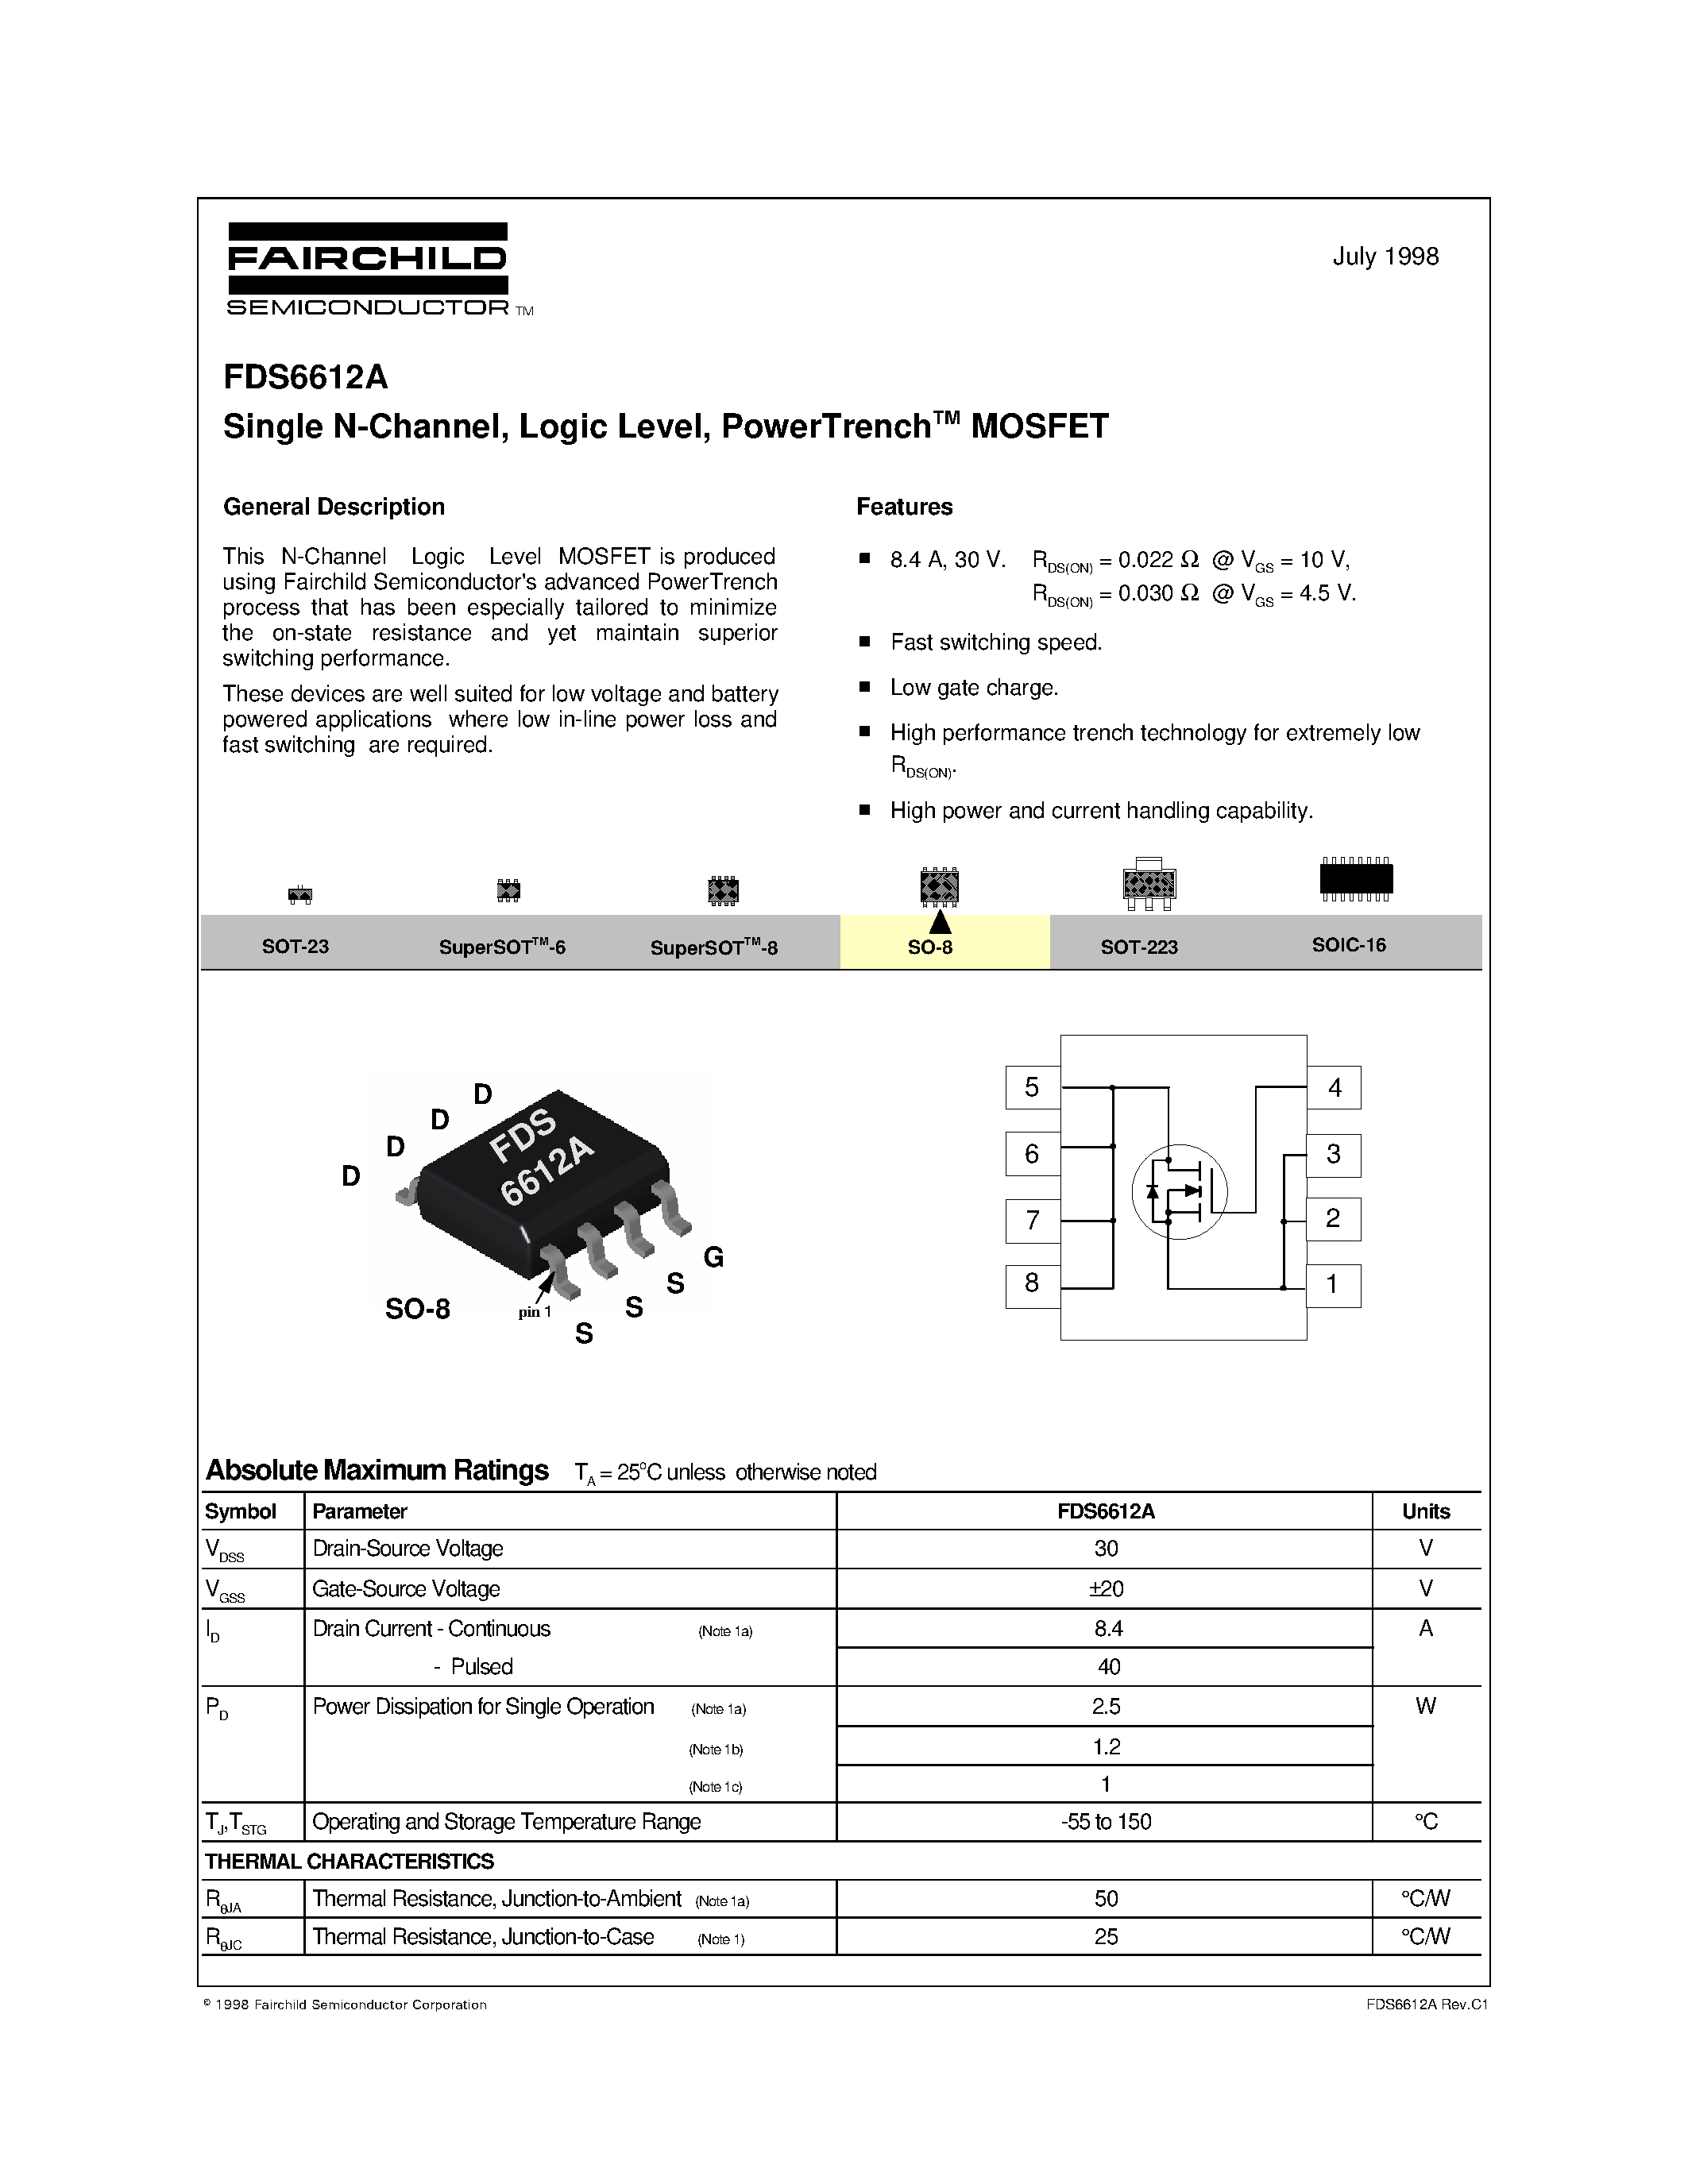 Datasheet FDS6612A - Single N-Channel/ Logic Level/ PowerTrenchTM MOSFET page 1